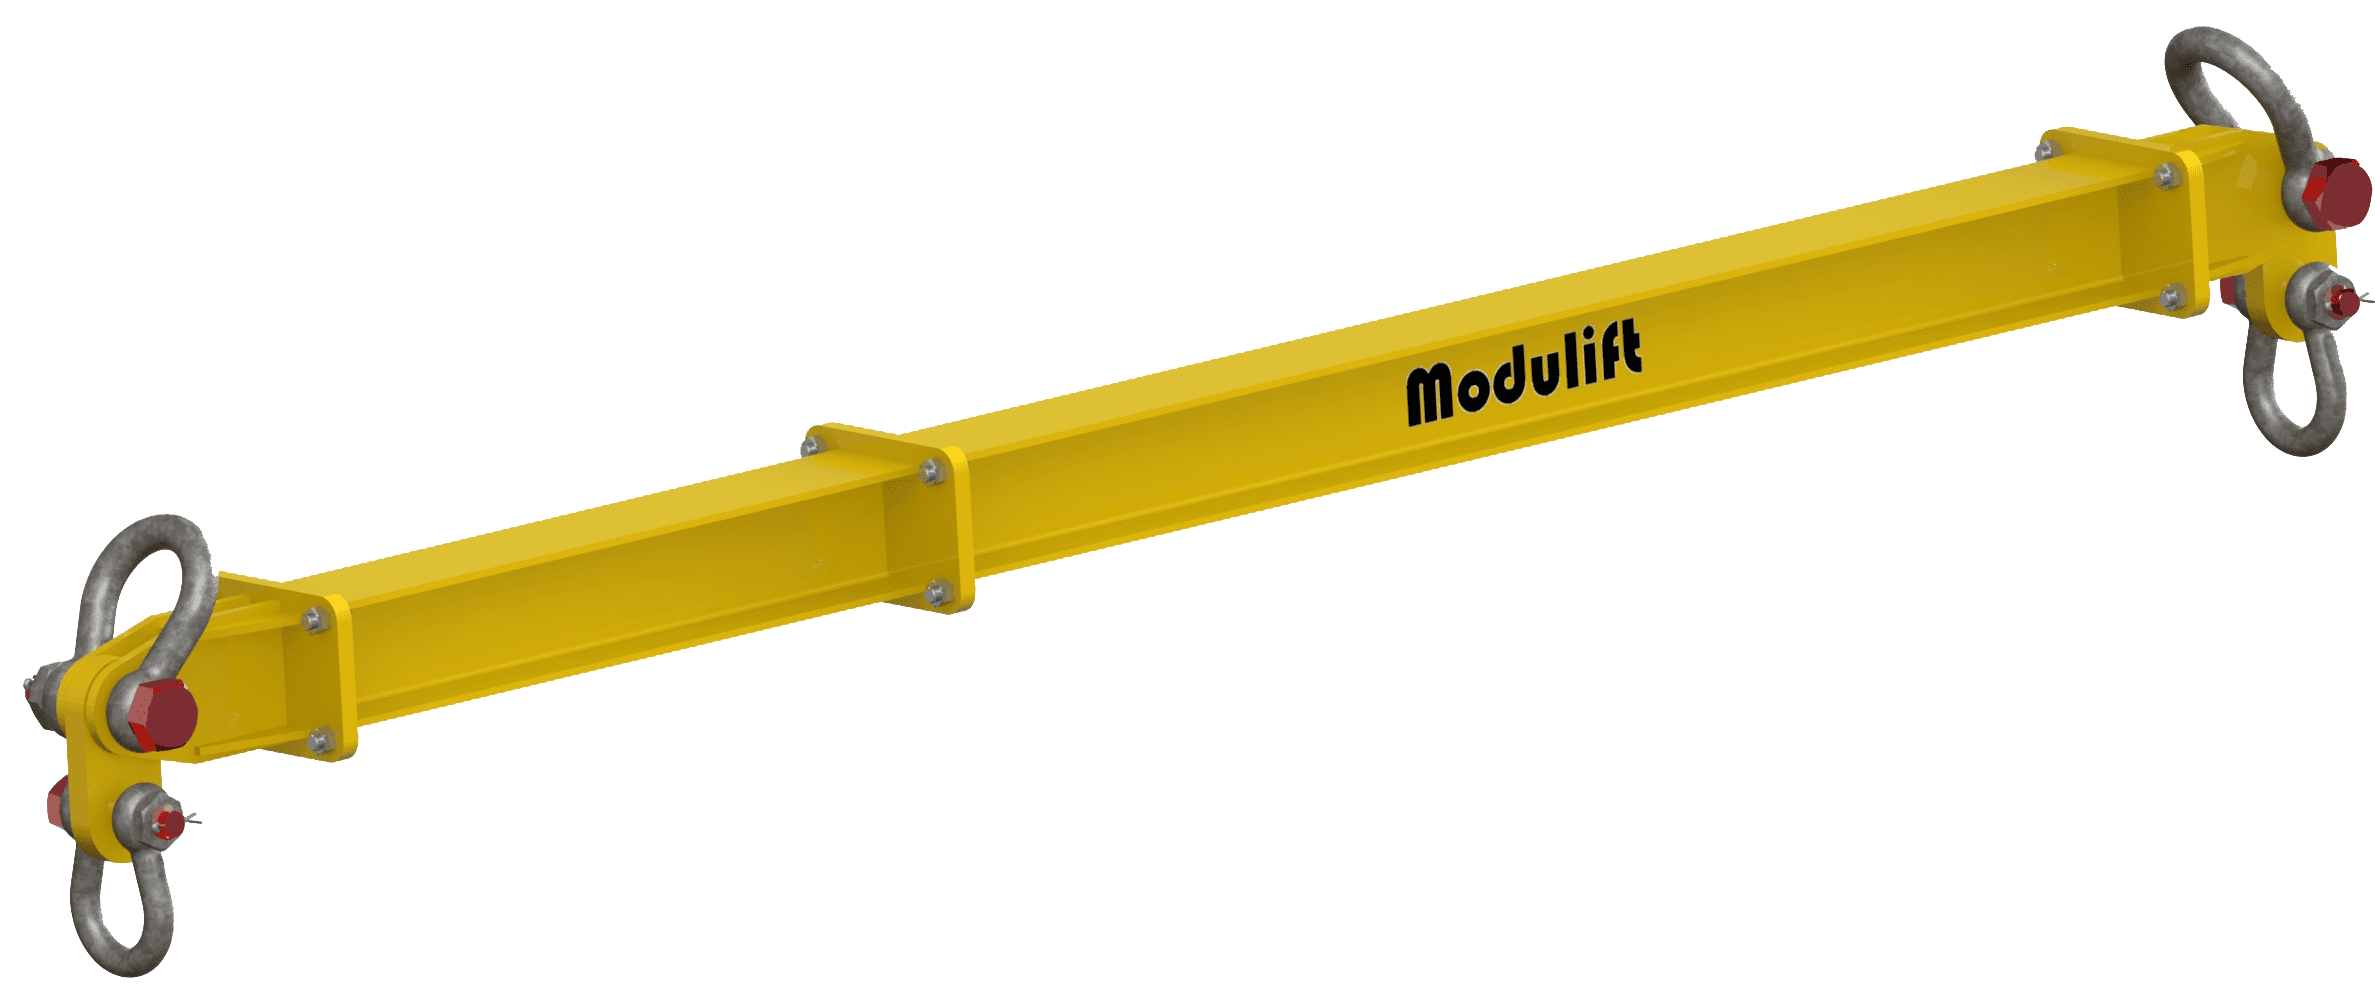 Modulift Subsea red pin spreader beam